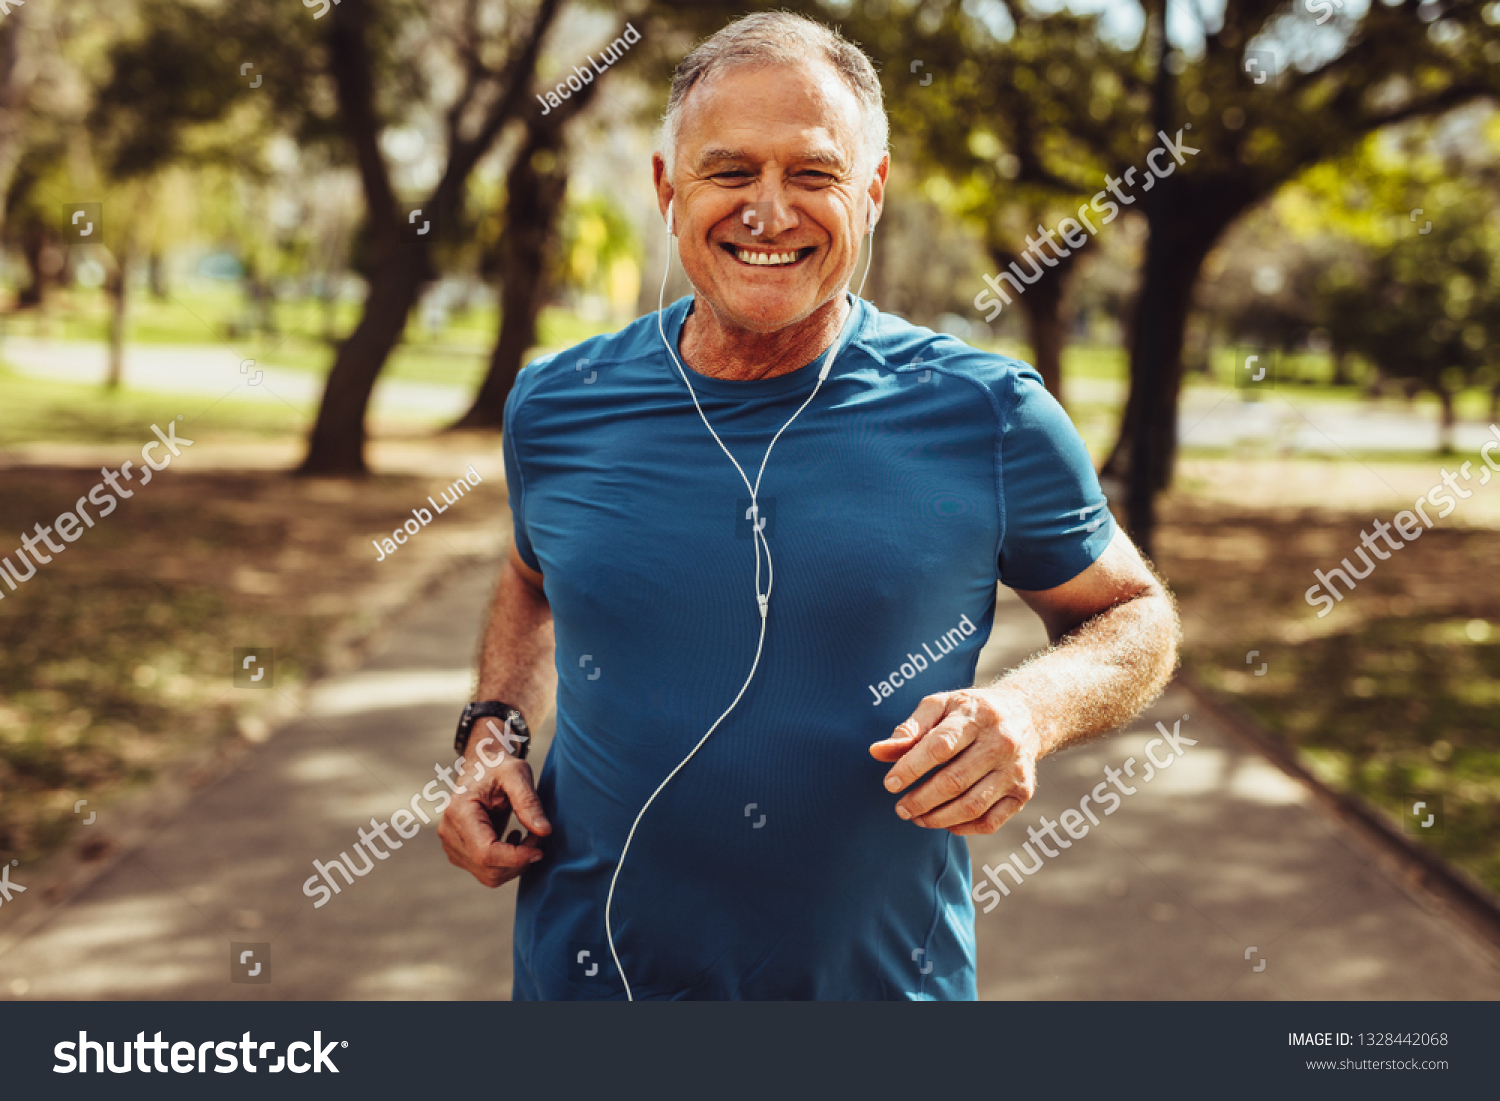 Portrait of a senior man in fitness wear running in a park. Close up of a smiling man running while listening to music using earphones. #1328442068